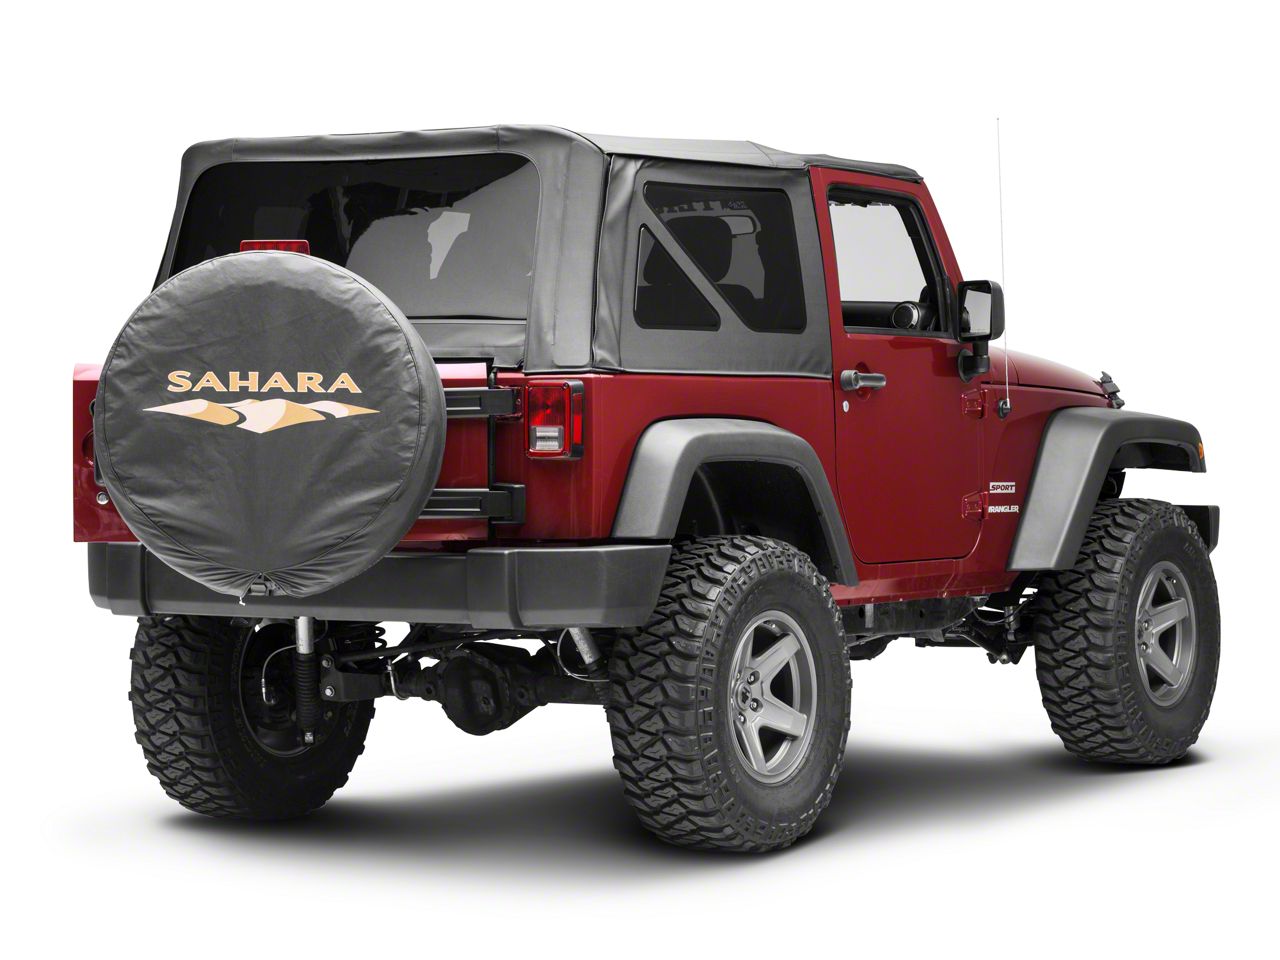 RED ROCK Outline Logo Spare Tire Cover; 30-Inch Tire Cover Compatible with 66-18 Jeep CJ5, CJ7, Wrangler YJ, TJ ＆ JK - 5